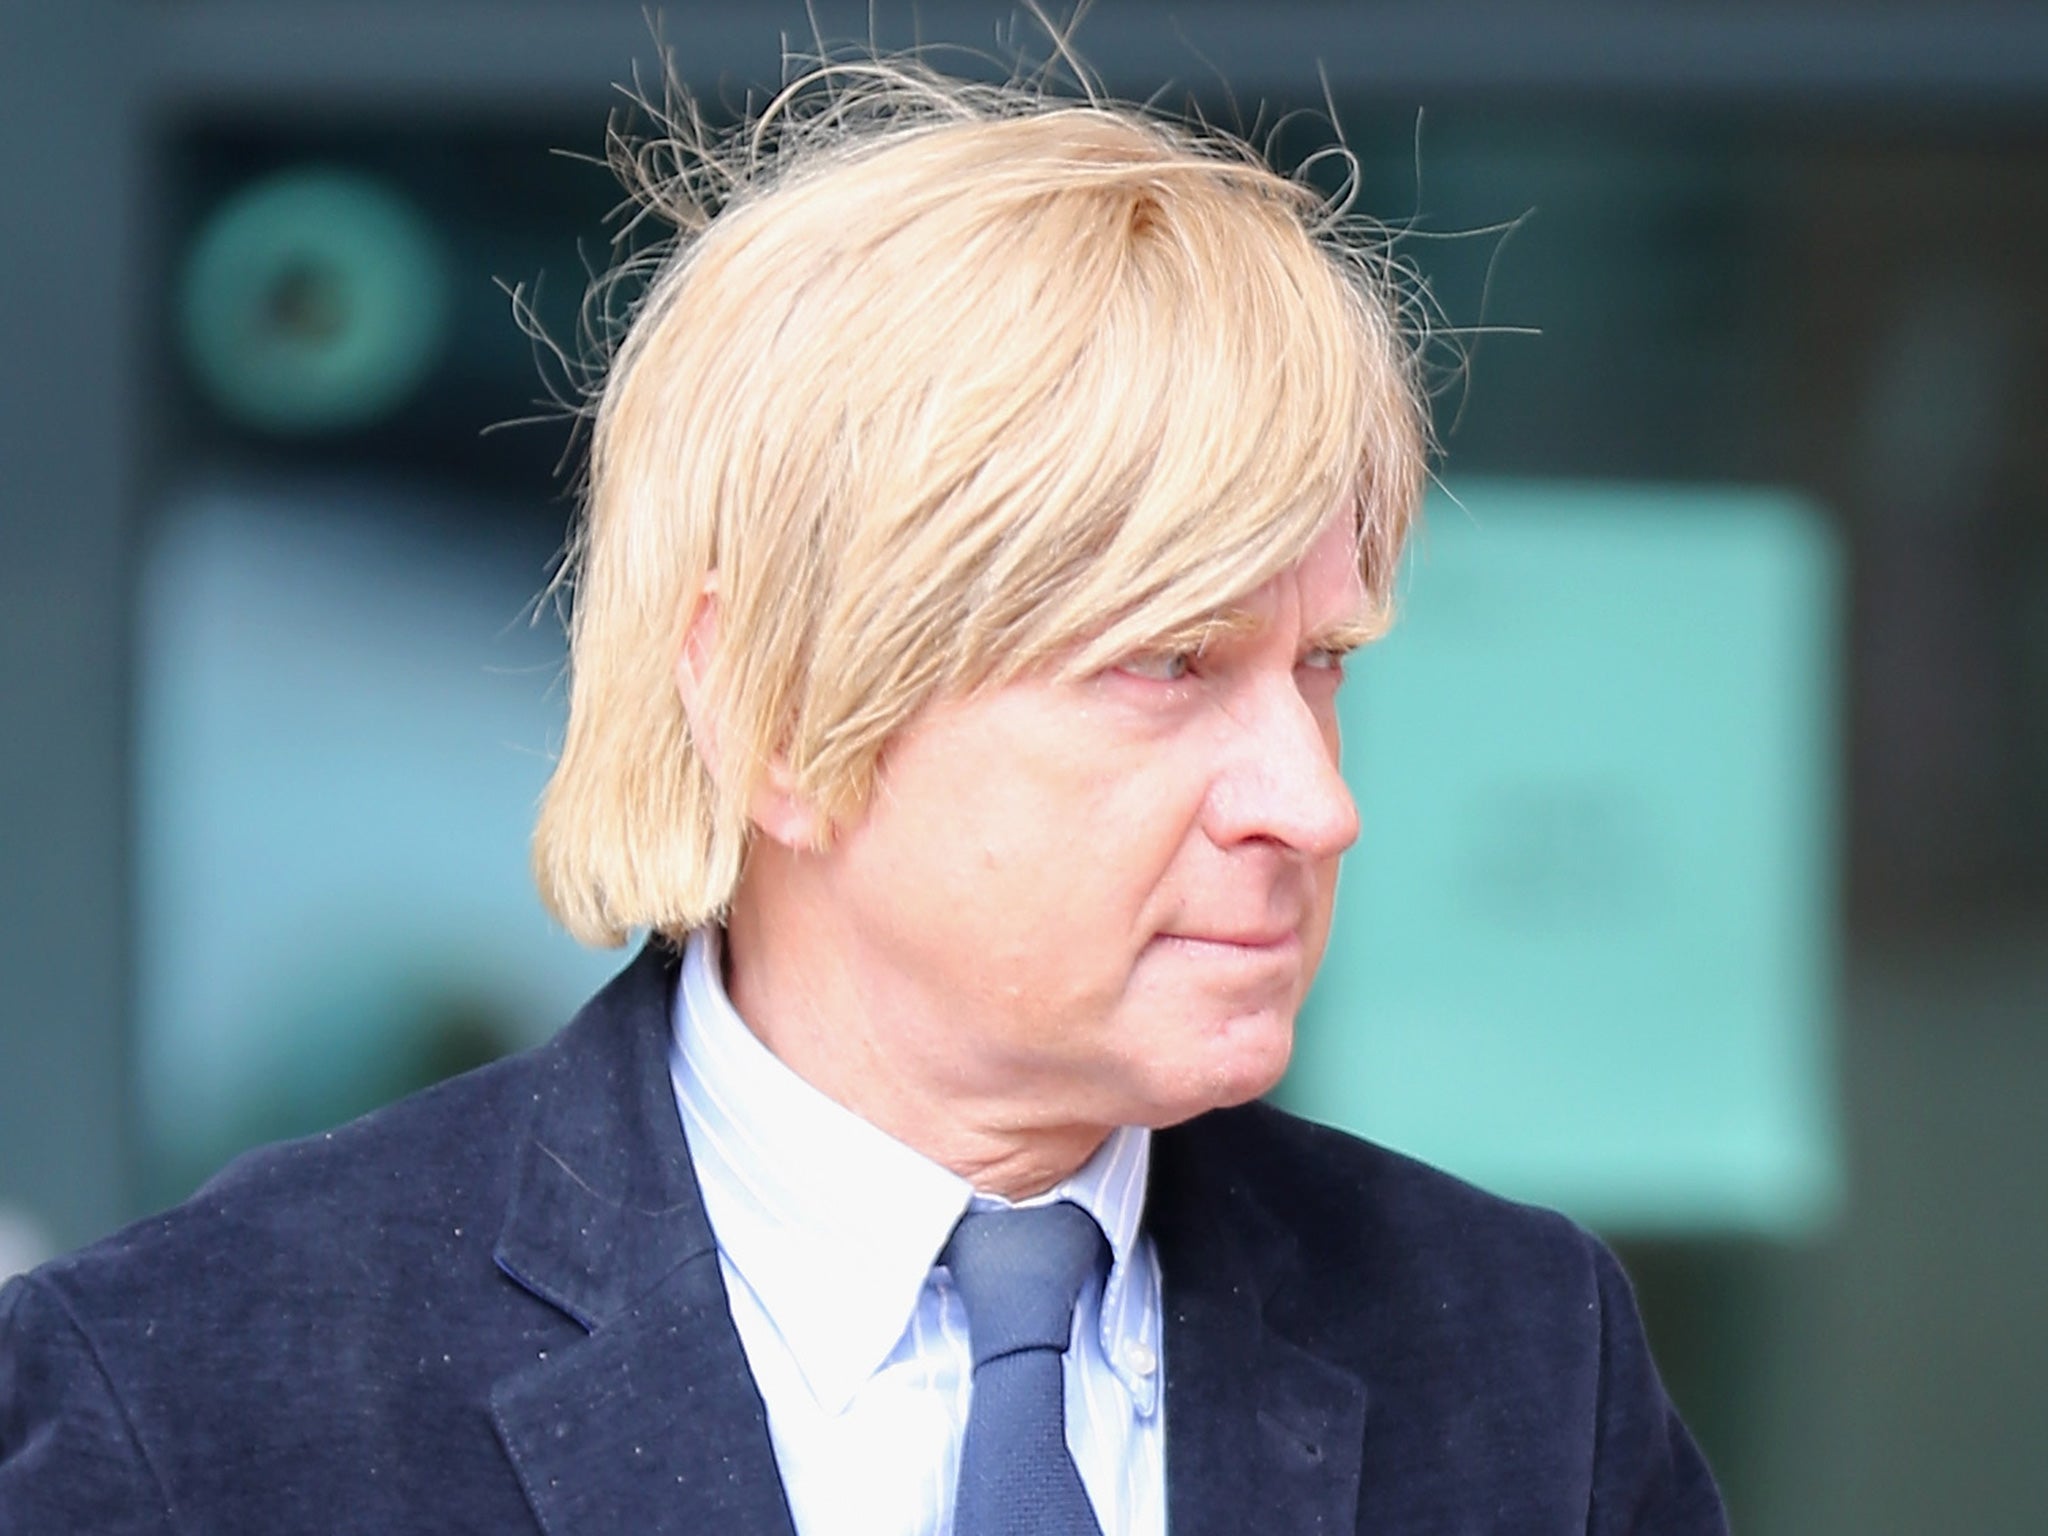 Michael Fabricant has been criticised for a tweet mentioning ‘Anglo-Muslim relations’